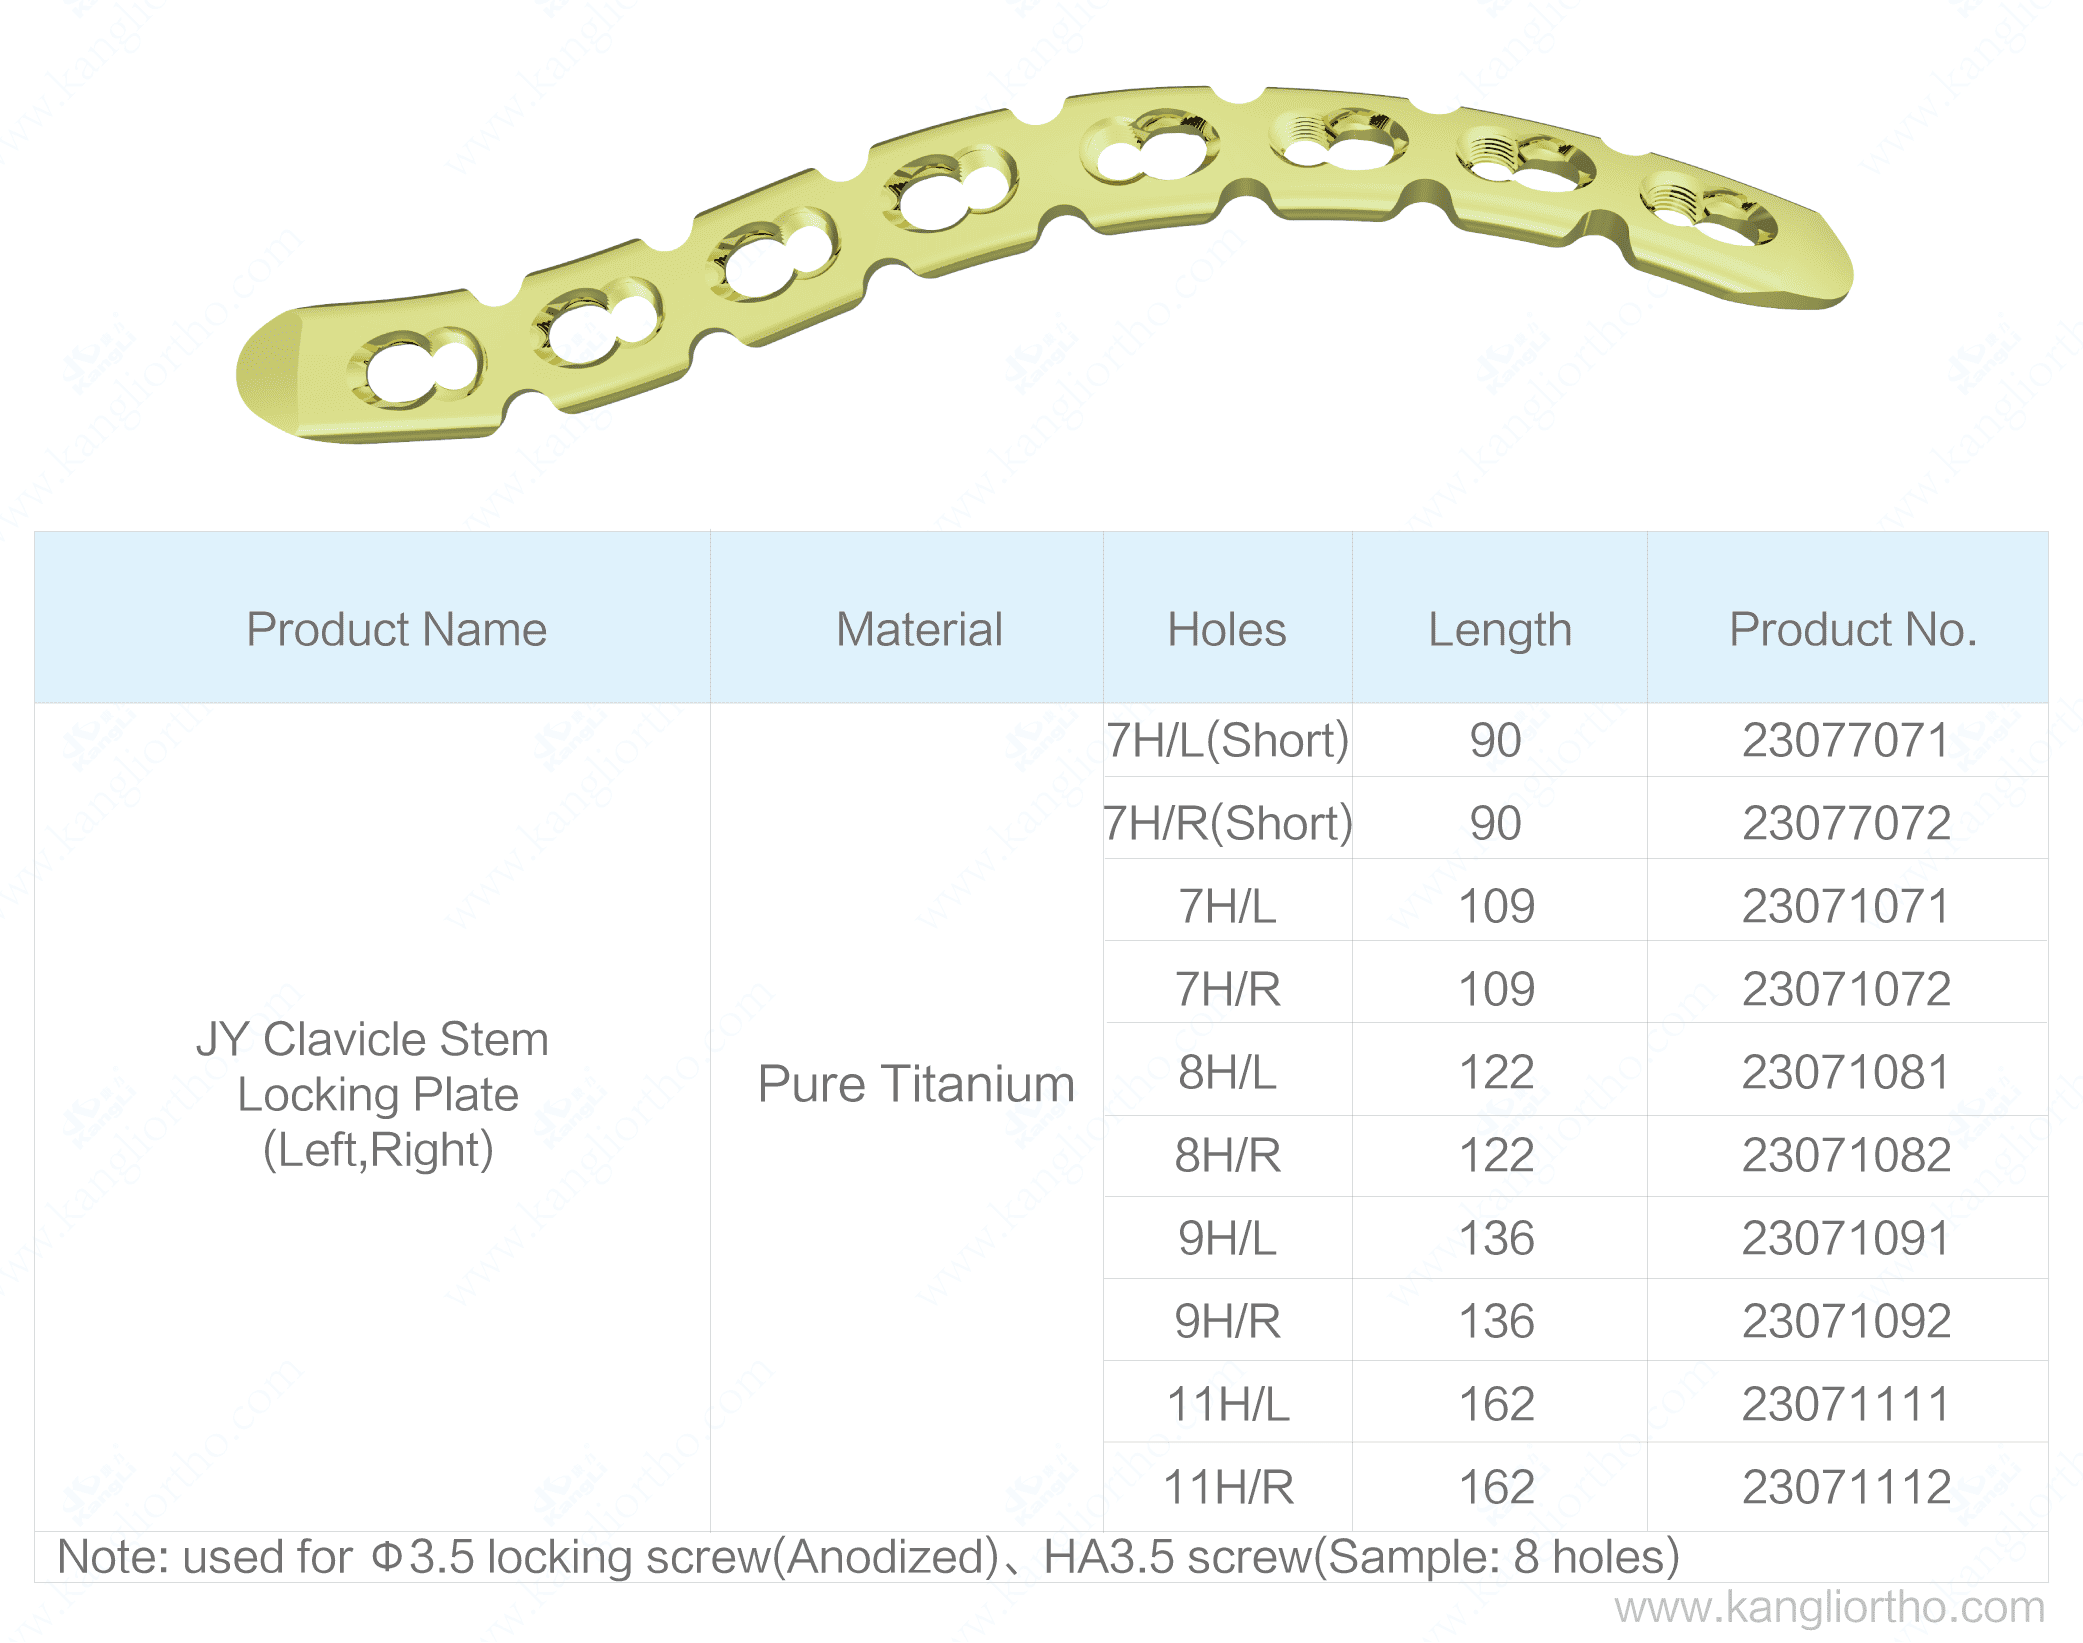 jy-clavicle-stem-locking-plate-specifications